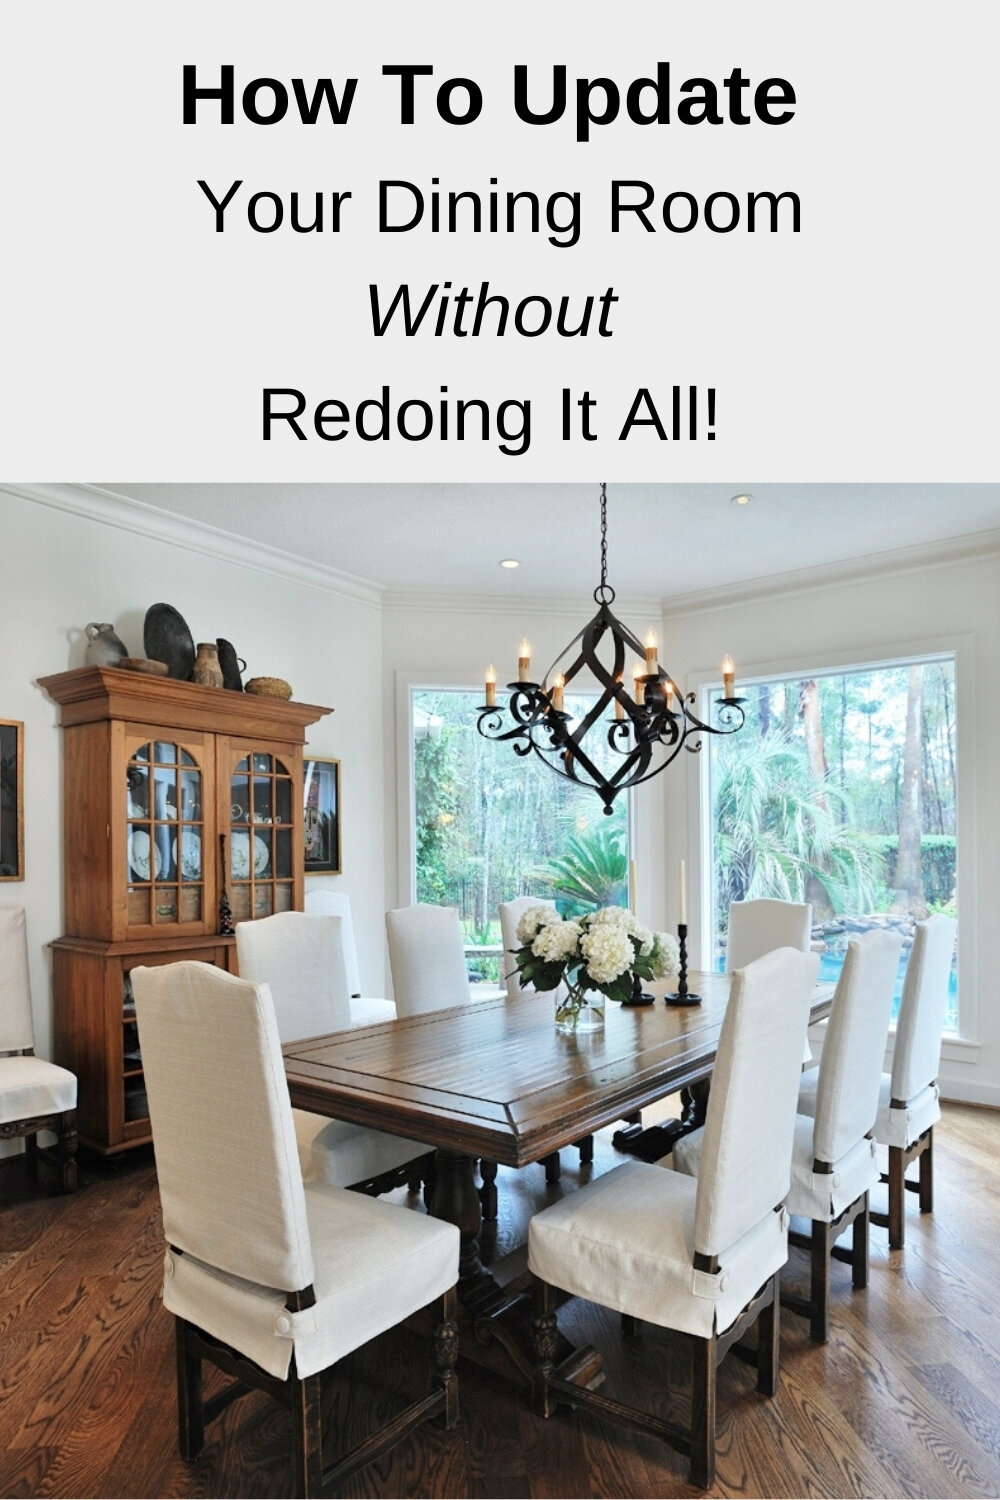 How To Update Your Dining Room Decor, Updating Traditional Dining Room Chairs